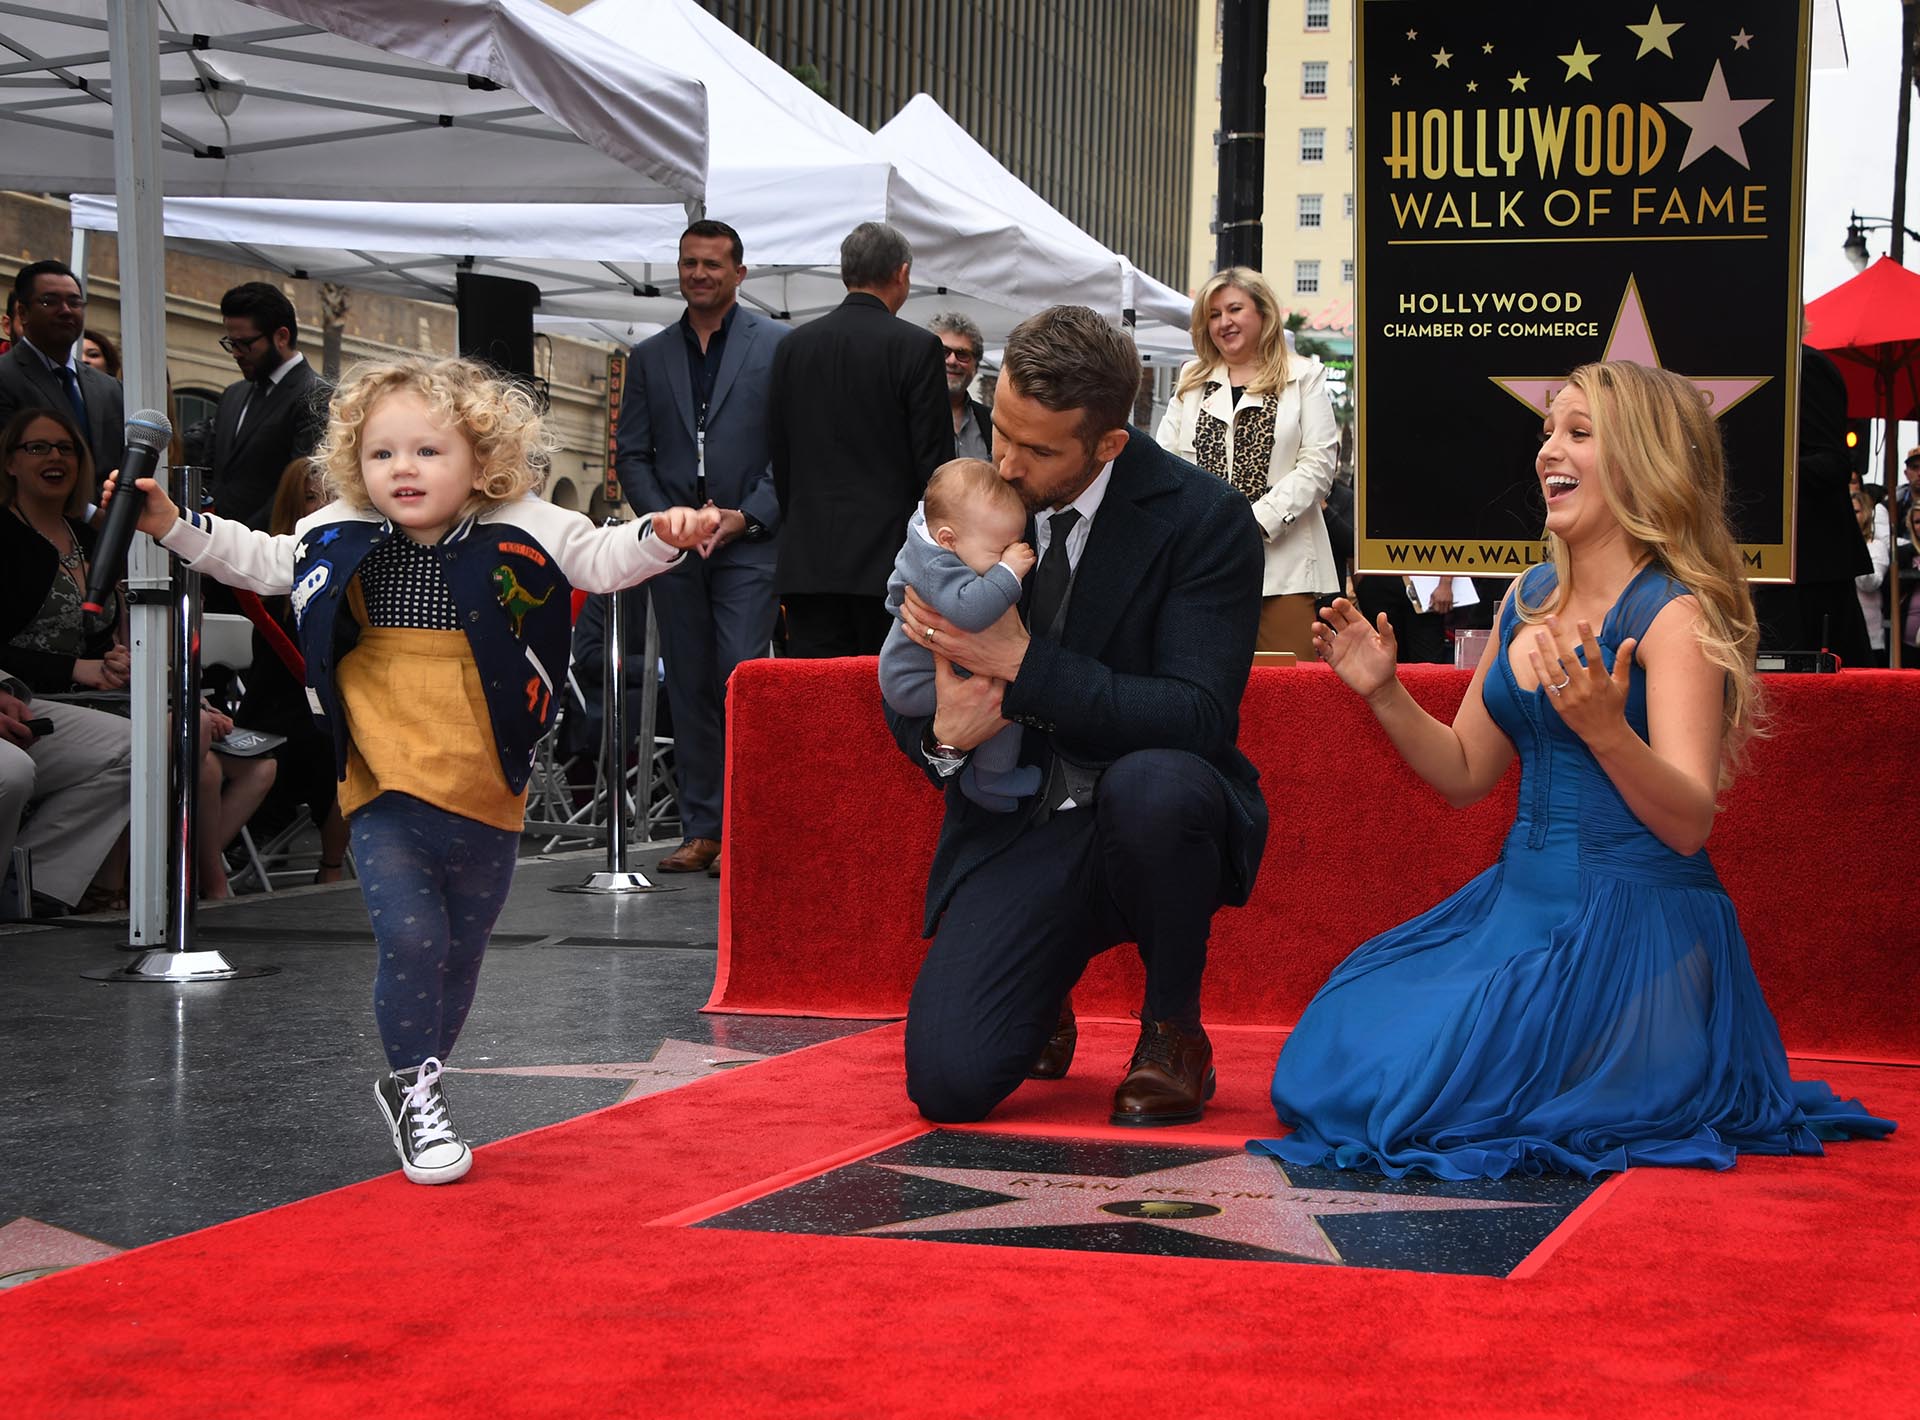 Ryan Reynolds with his wife and children (Photo: Mark Ralston)